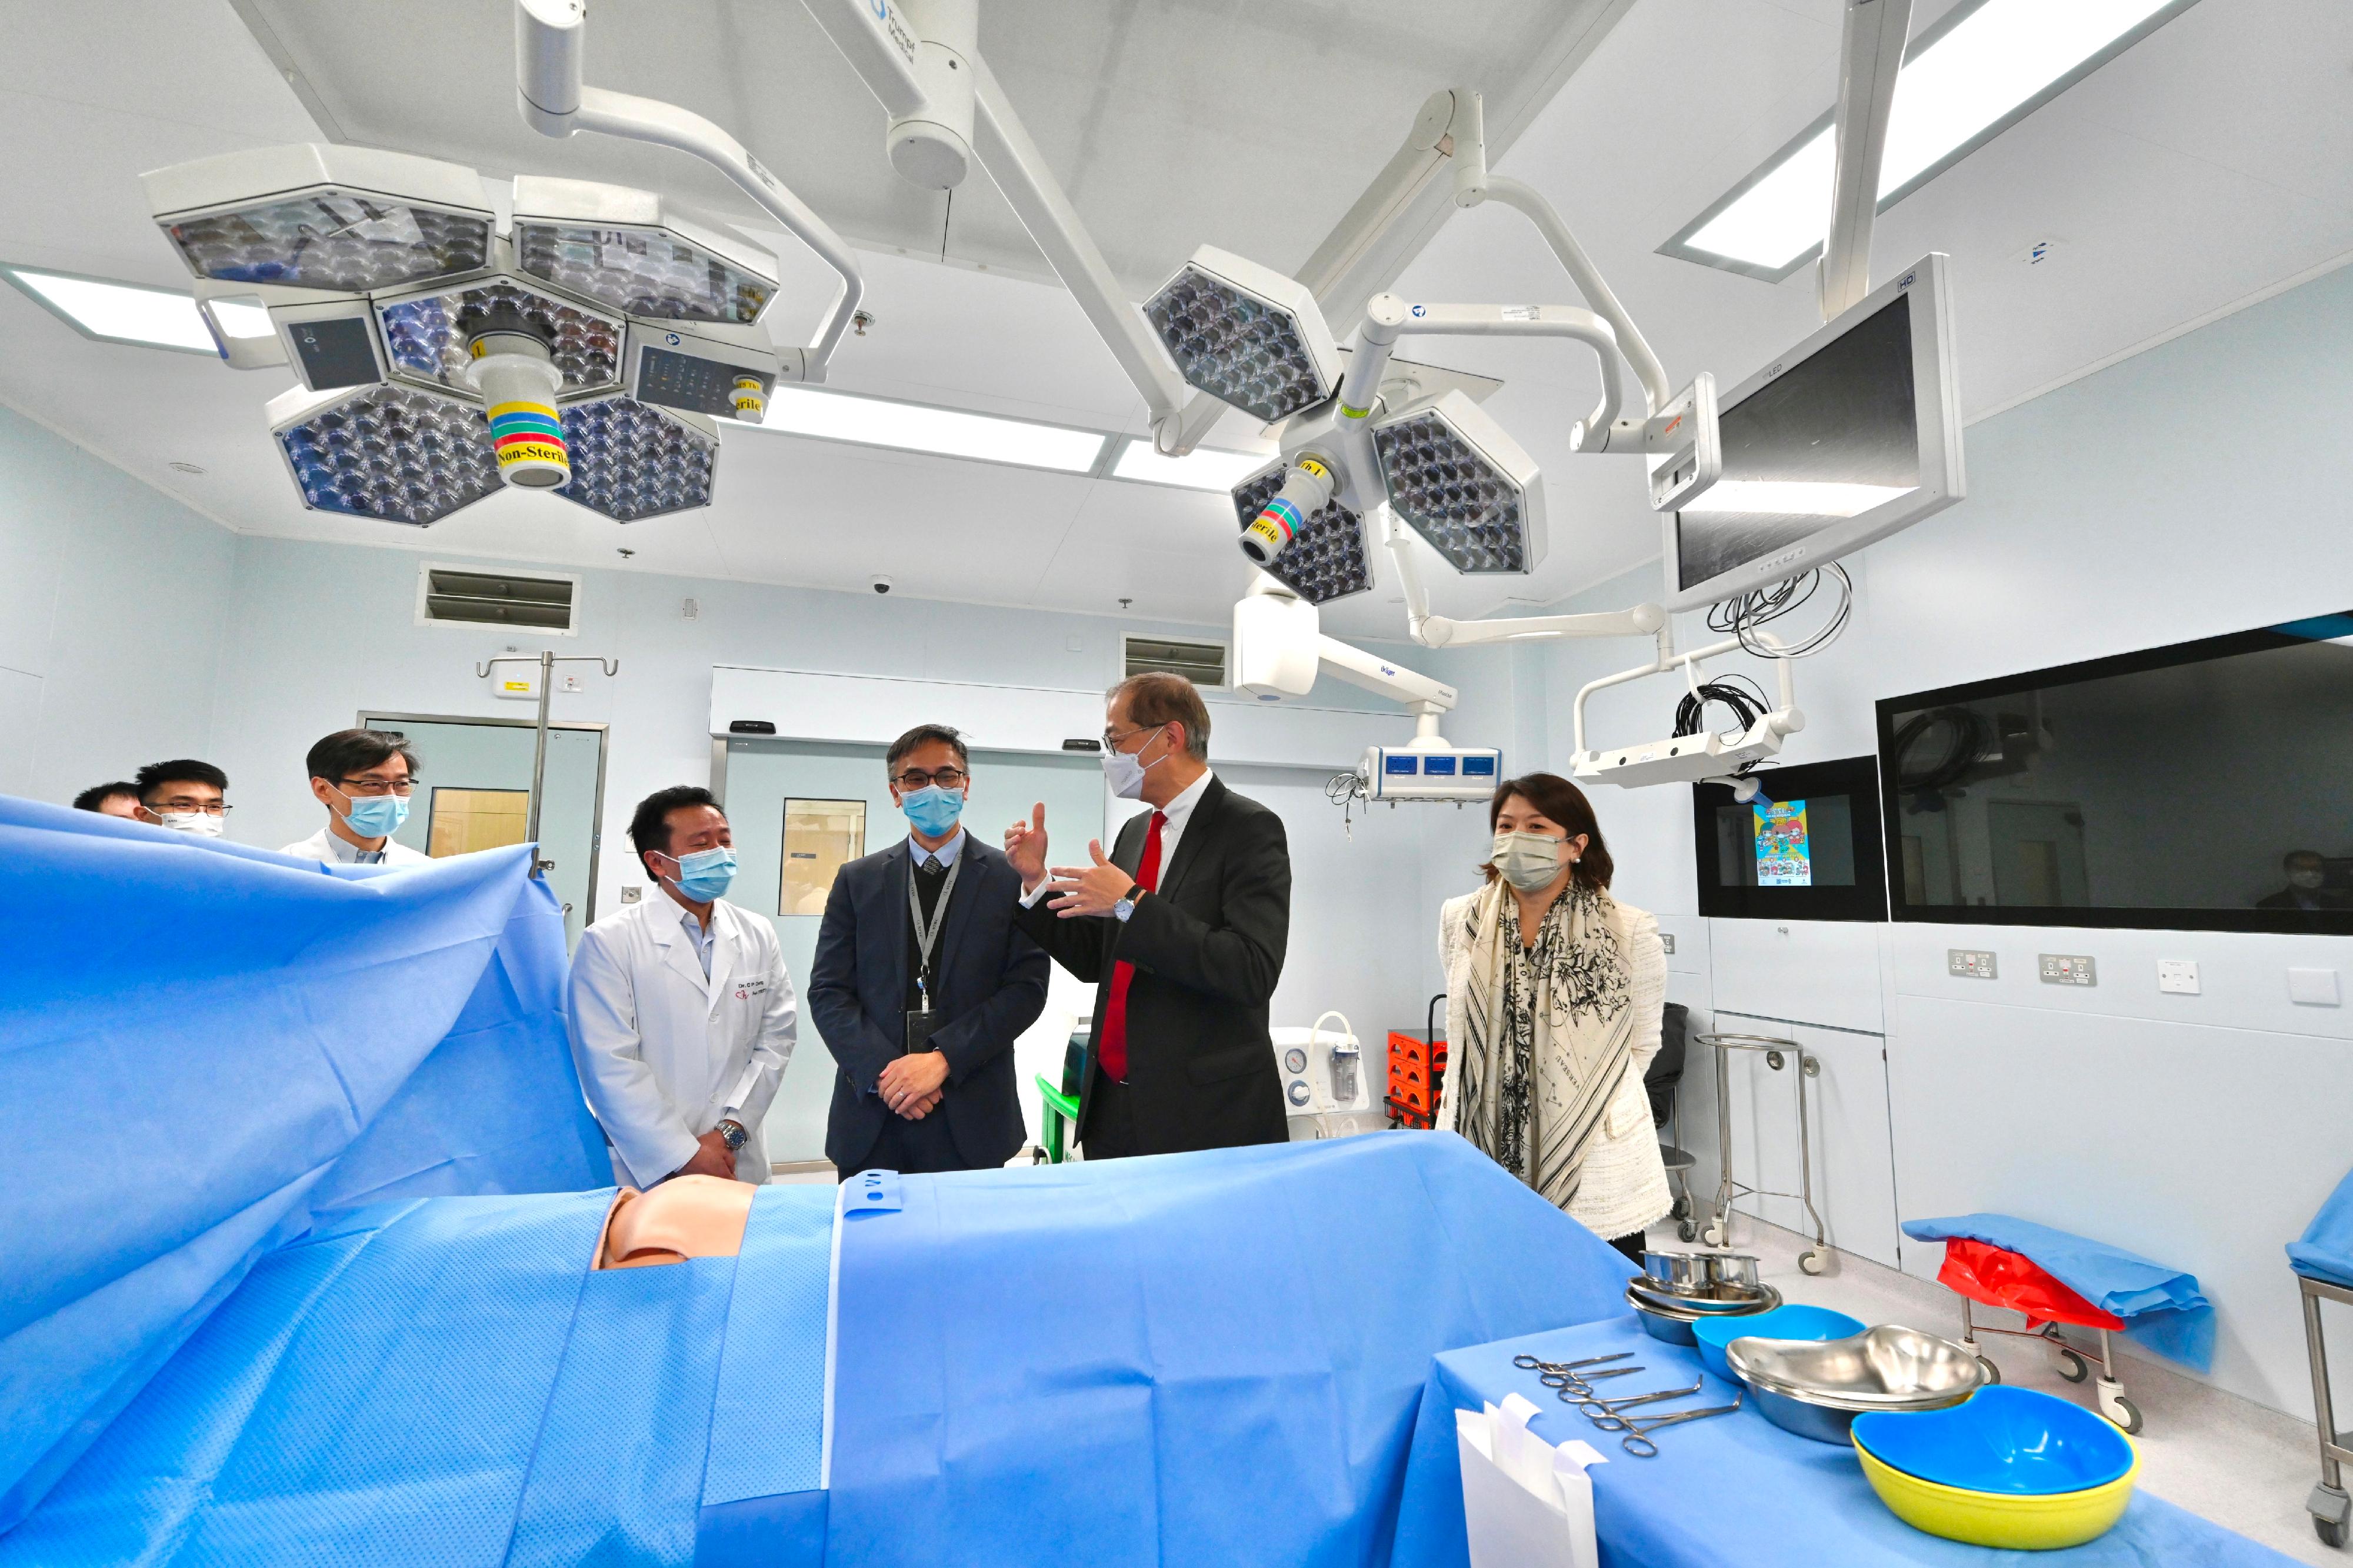 The Secretary for Health, Professor Lo Chung-mau (second right), and the Under Secretary for Health, Dr Libby Lee(first right), visited the new operation theatre of Tuen Mun Hospital today (February 9).